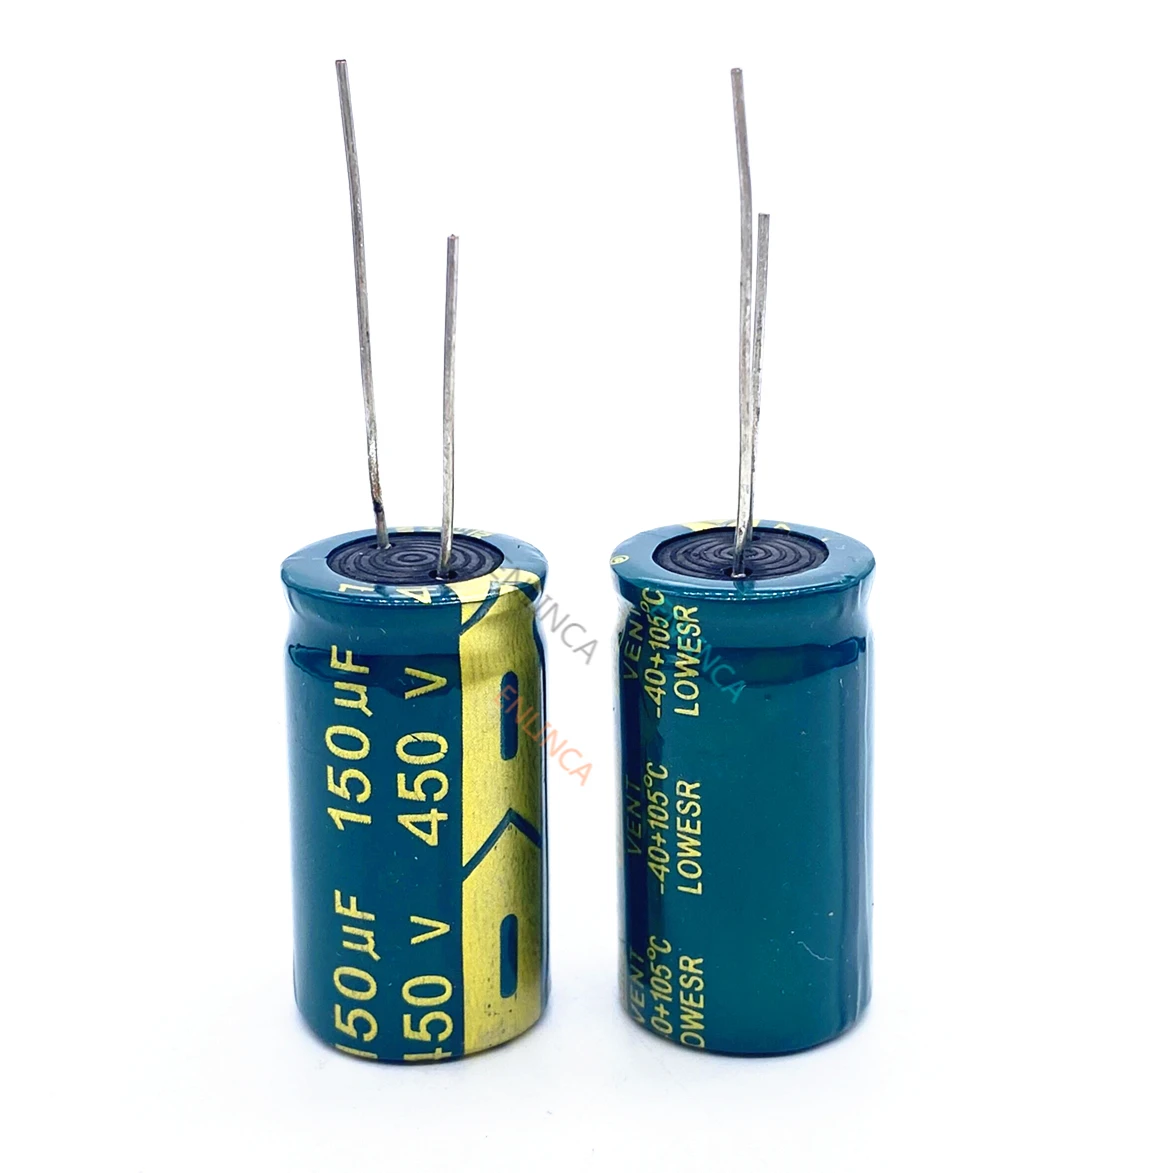 

2pcs/lot RA03 450V 150UF size 18*30MM high frequency low impedance 400V150UF aluminum electrolytic capacitor 20%